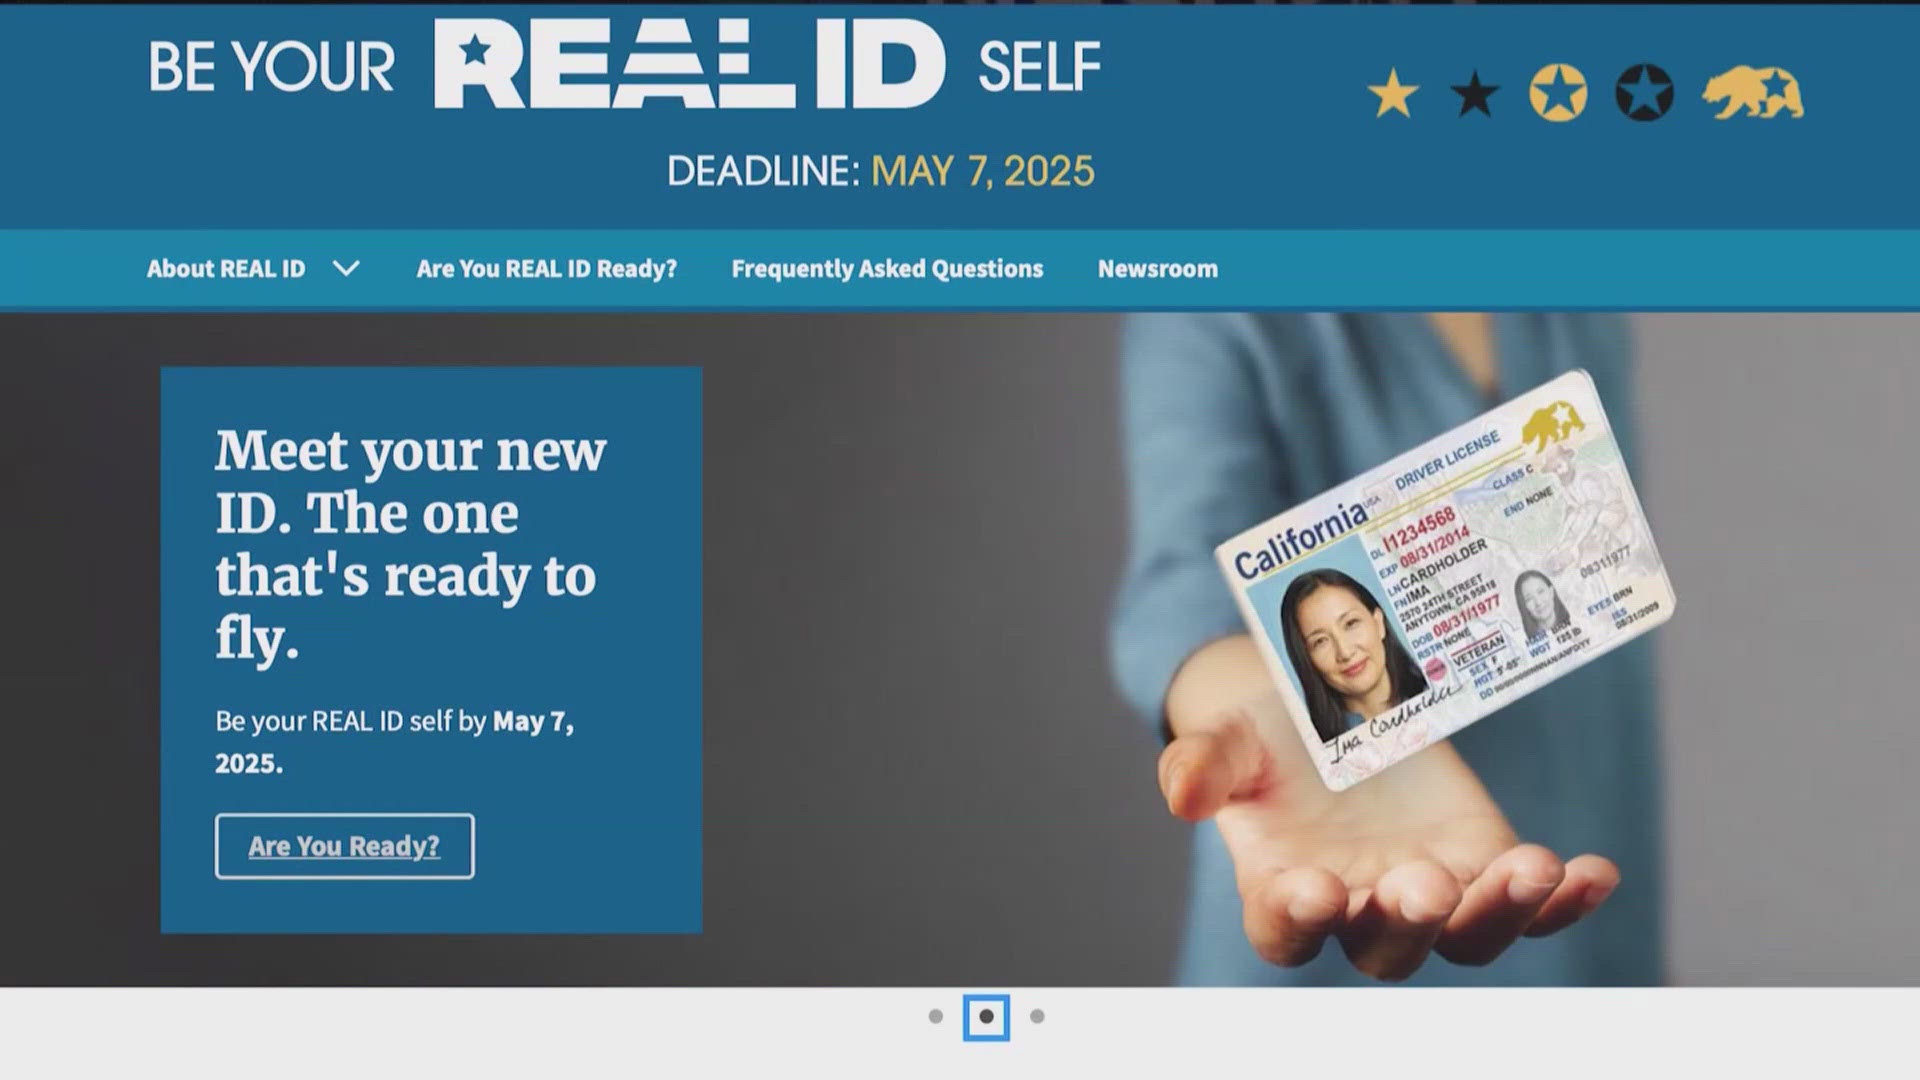 The enforcement of Real IDs begins May of next year. That means you have one year to make sure you have all the documents you need in order to trial.